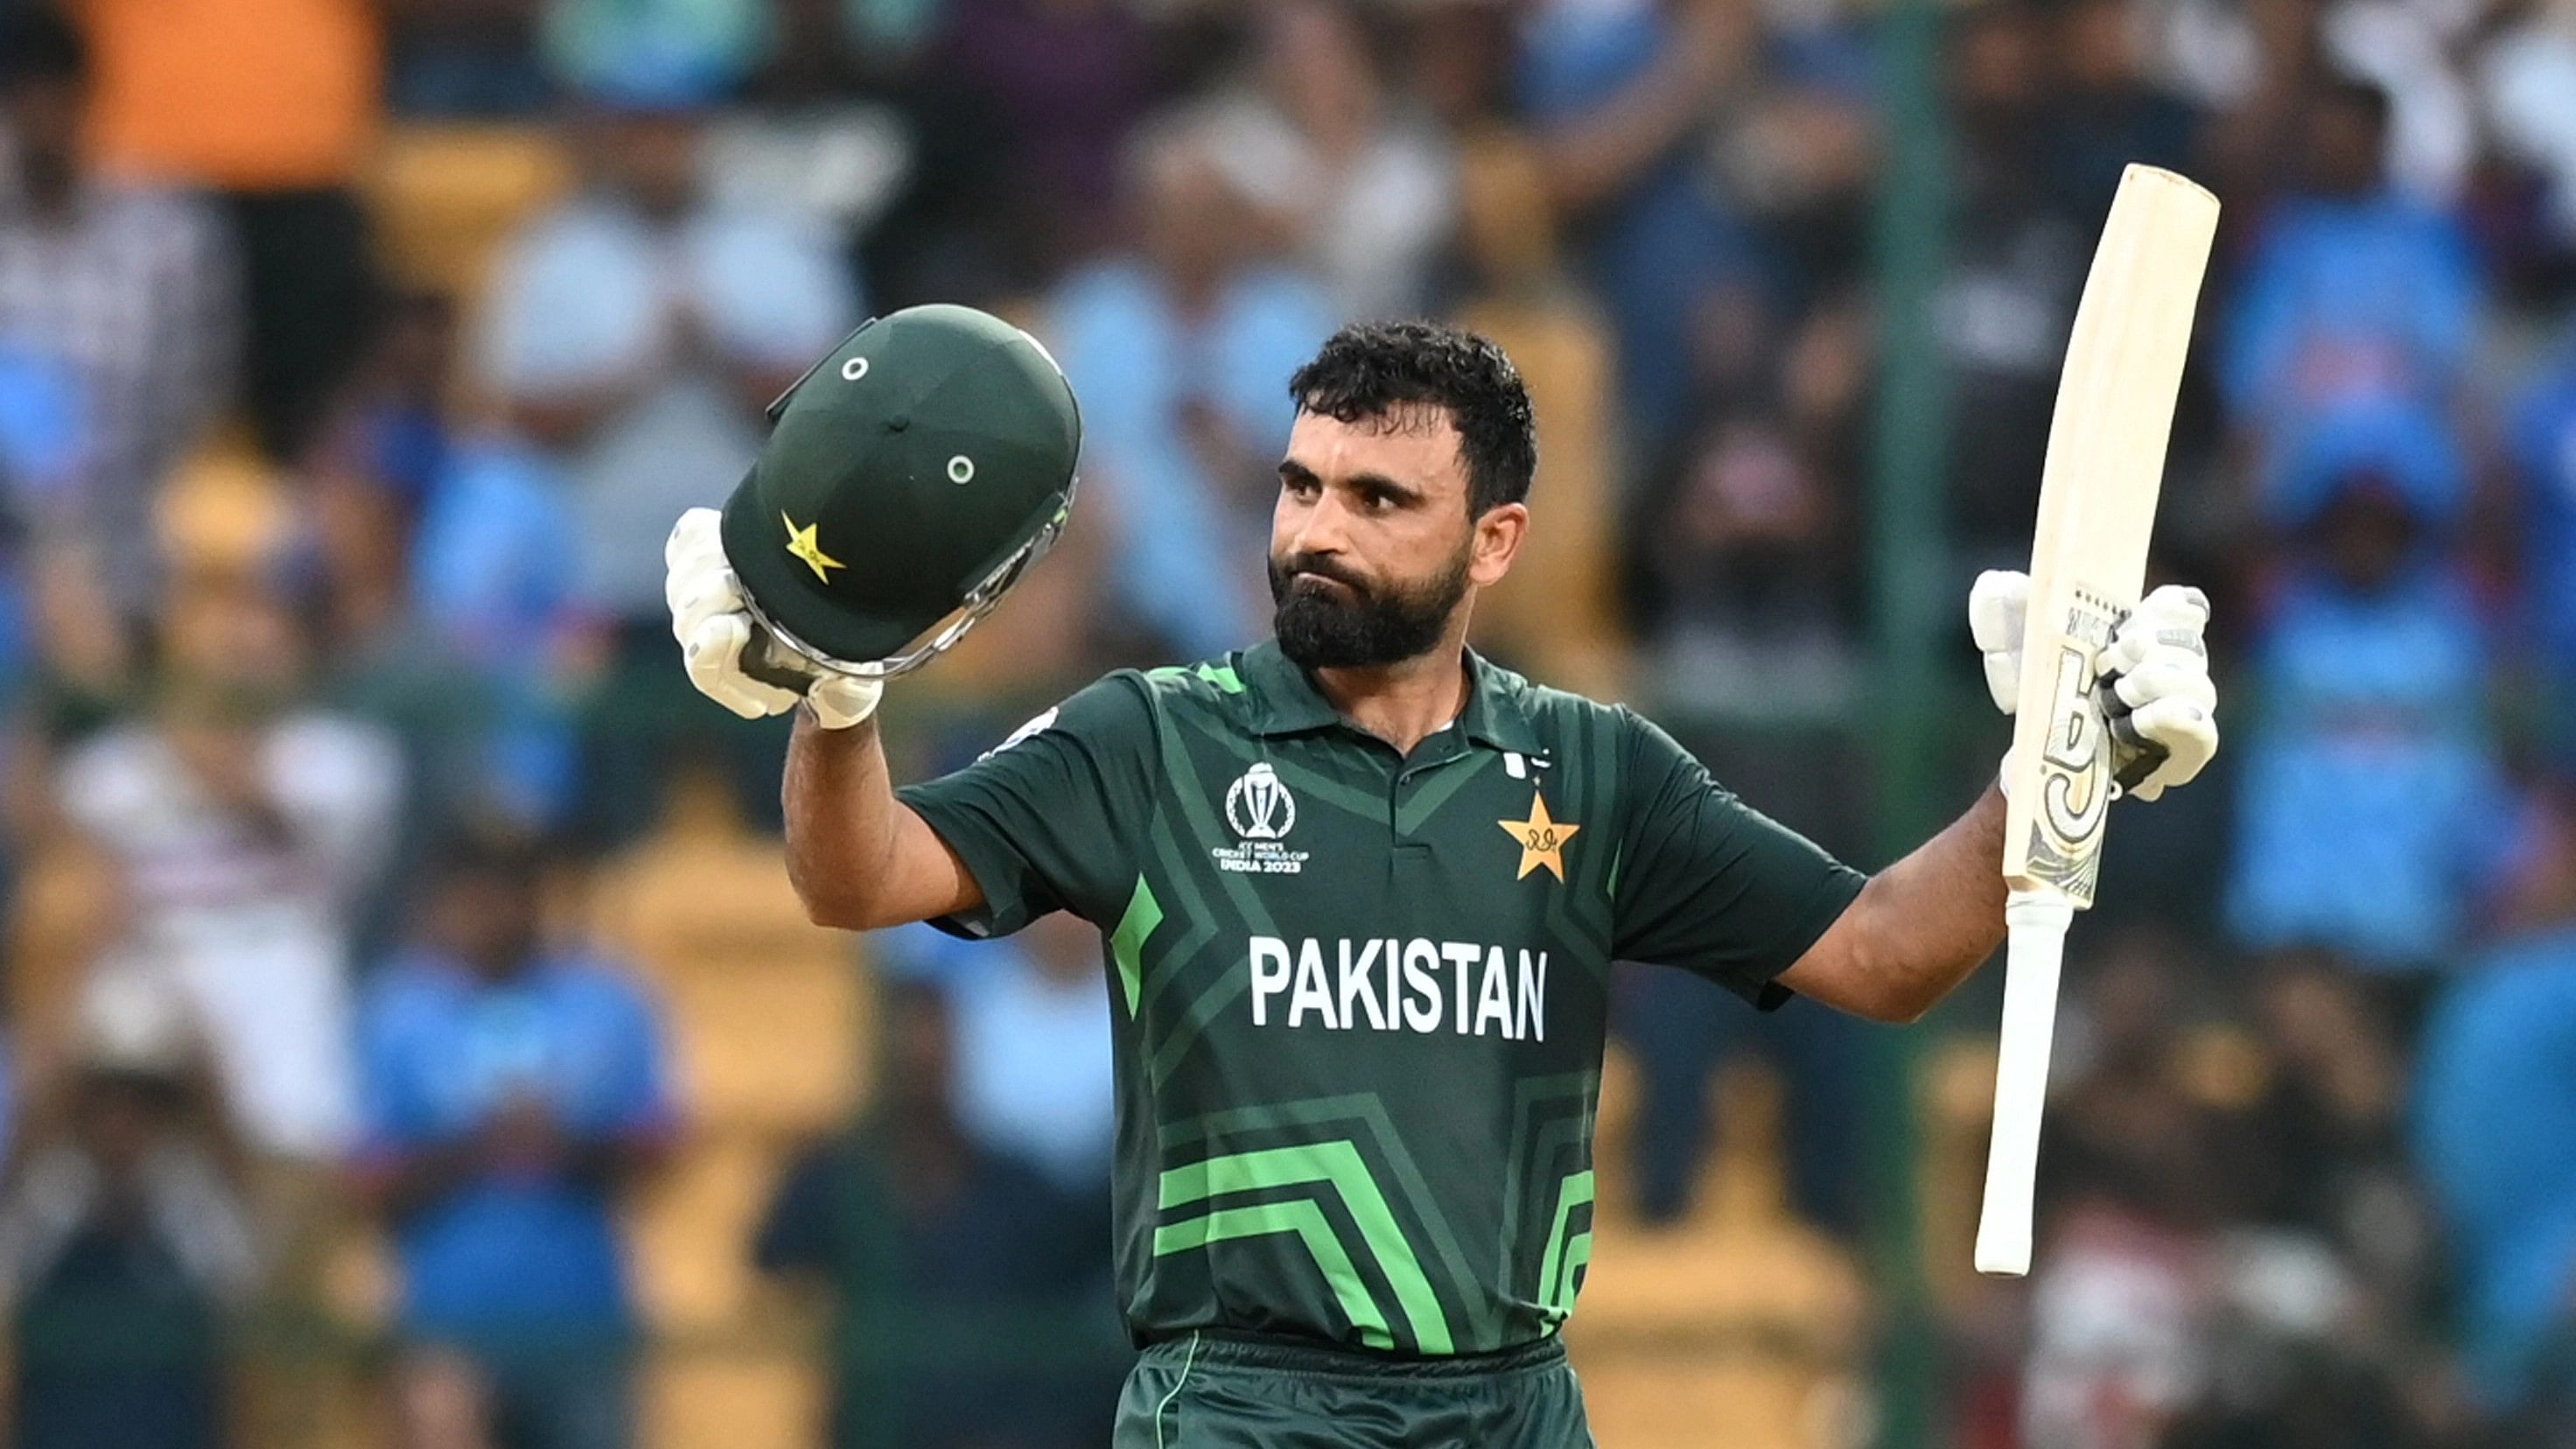 <div class="paragraphs"><p>Fakhar Zaman celebrates after scoring the fastest century by a Pakistan player at a World Cup in his side's 21-run win over New Zealand at the M Chinnaswamy Stadium on Saturday. </p></div>